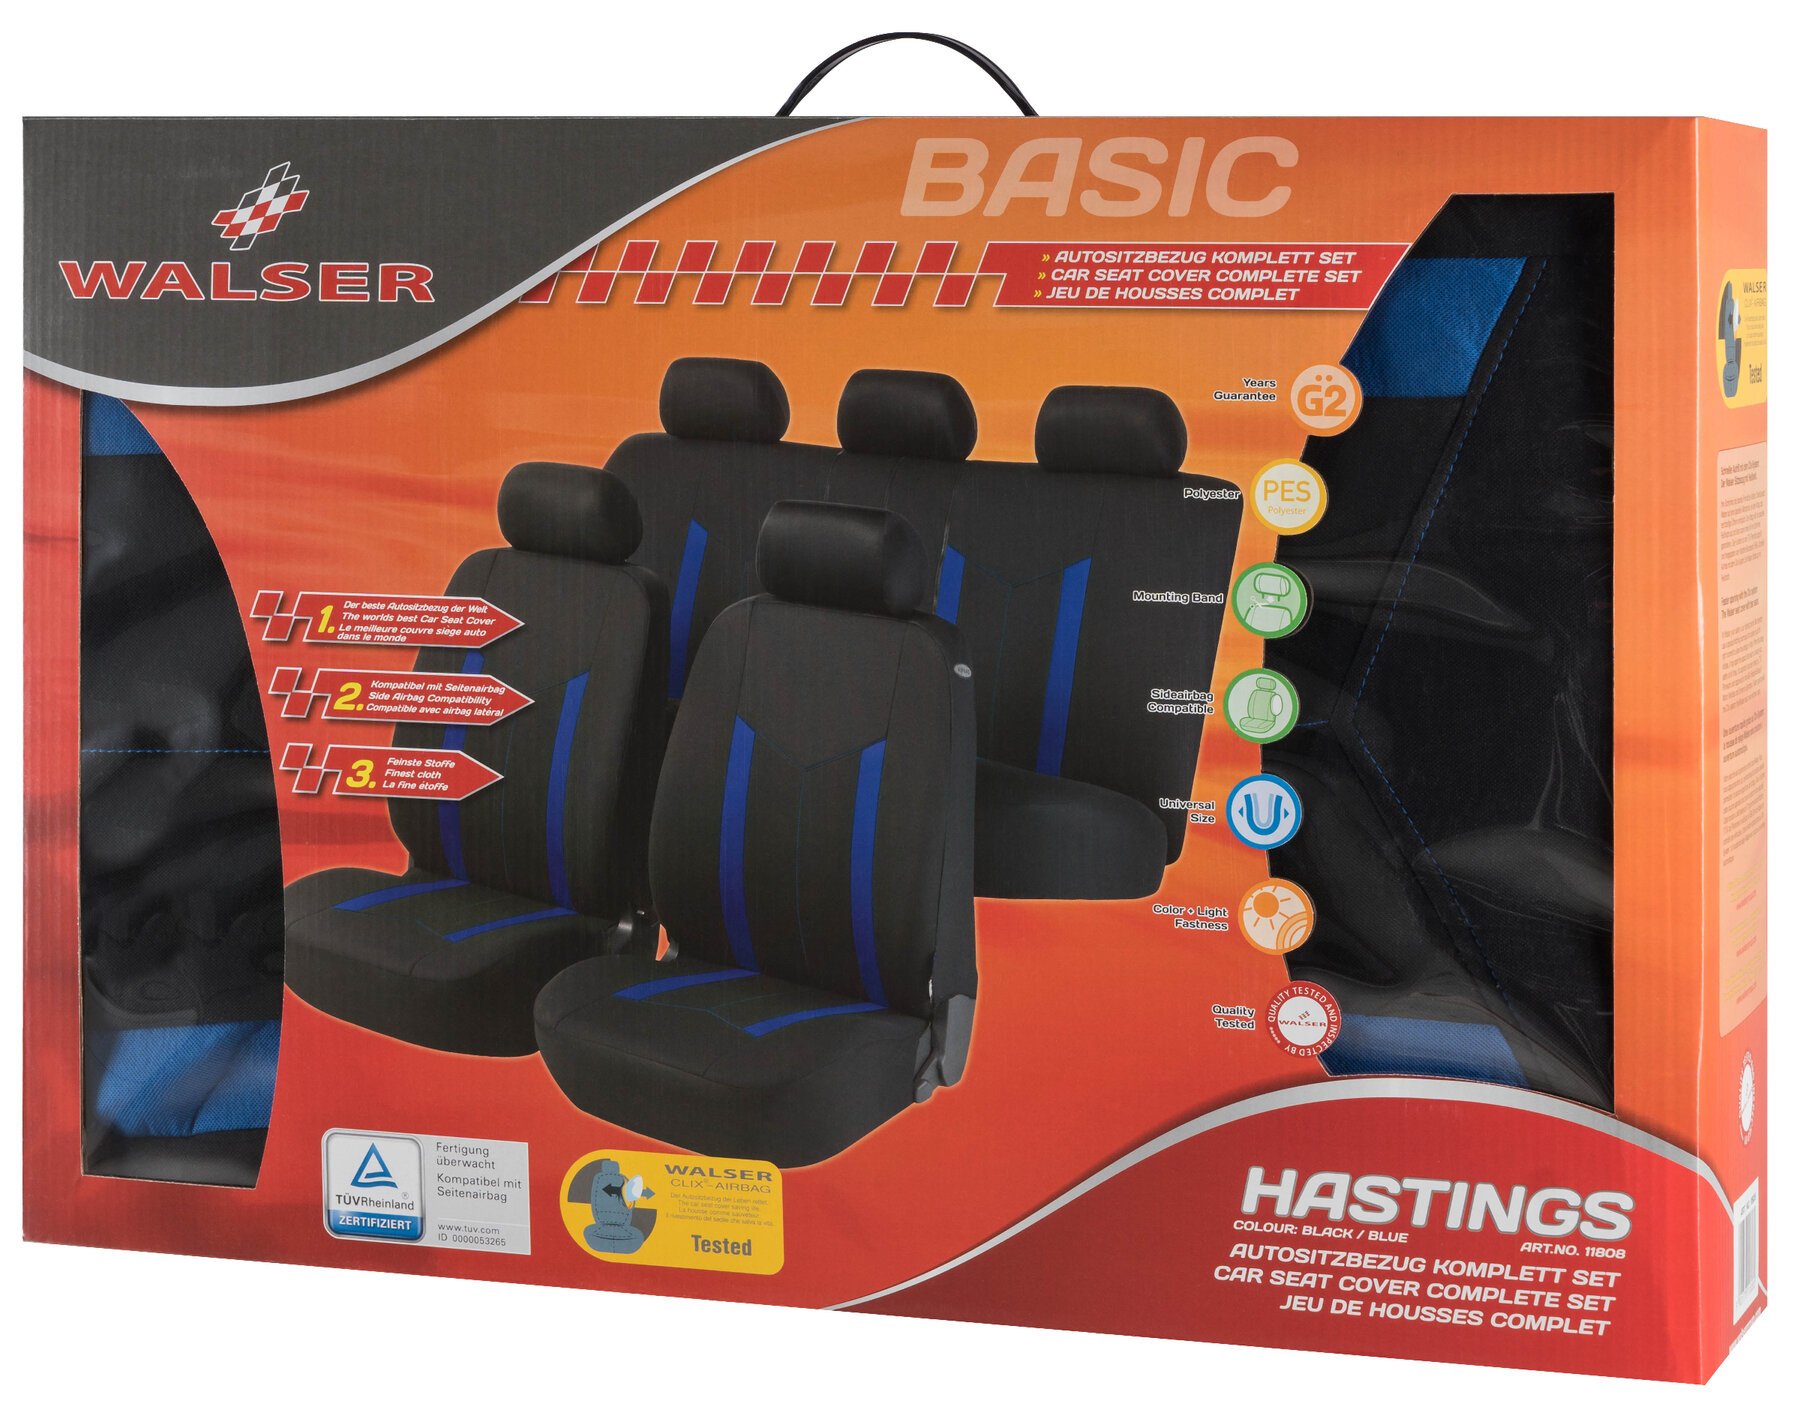 Car Seat cover Hastings blue complete set